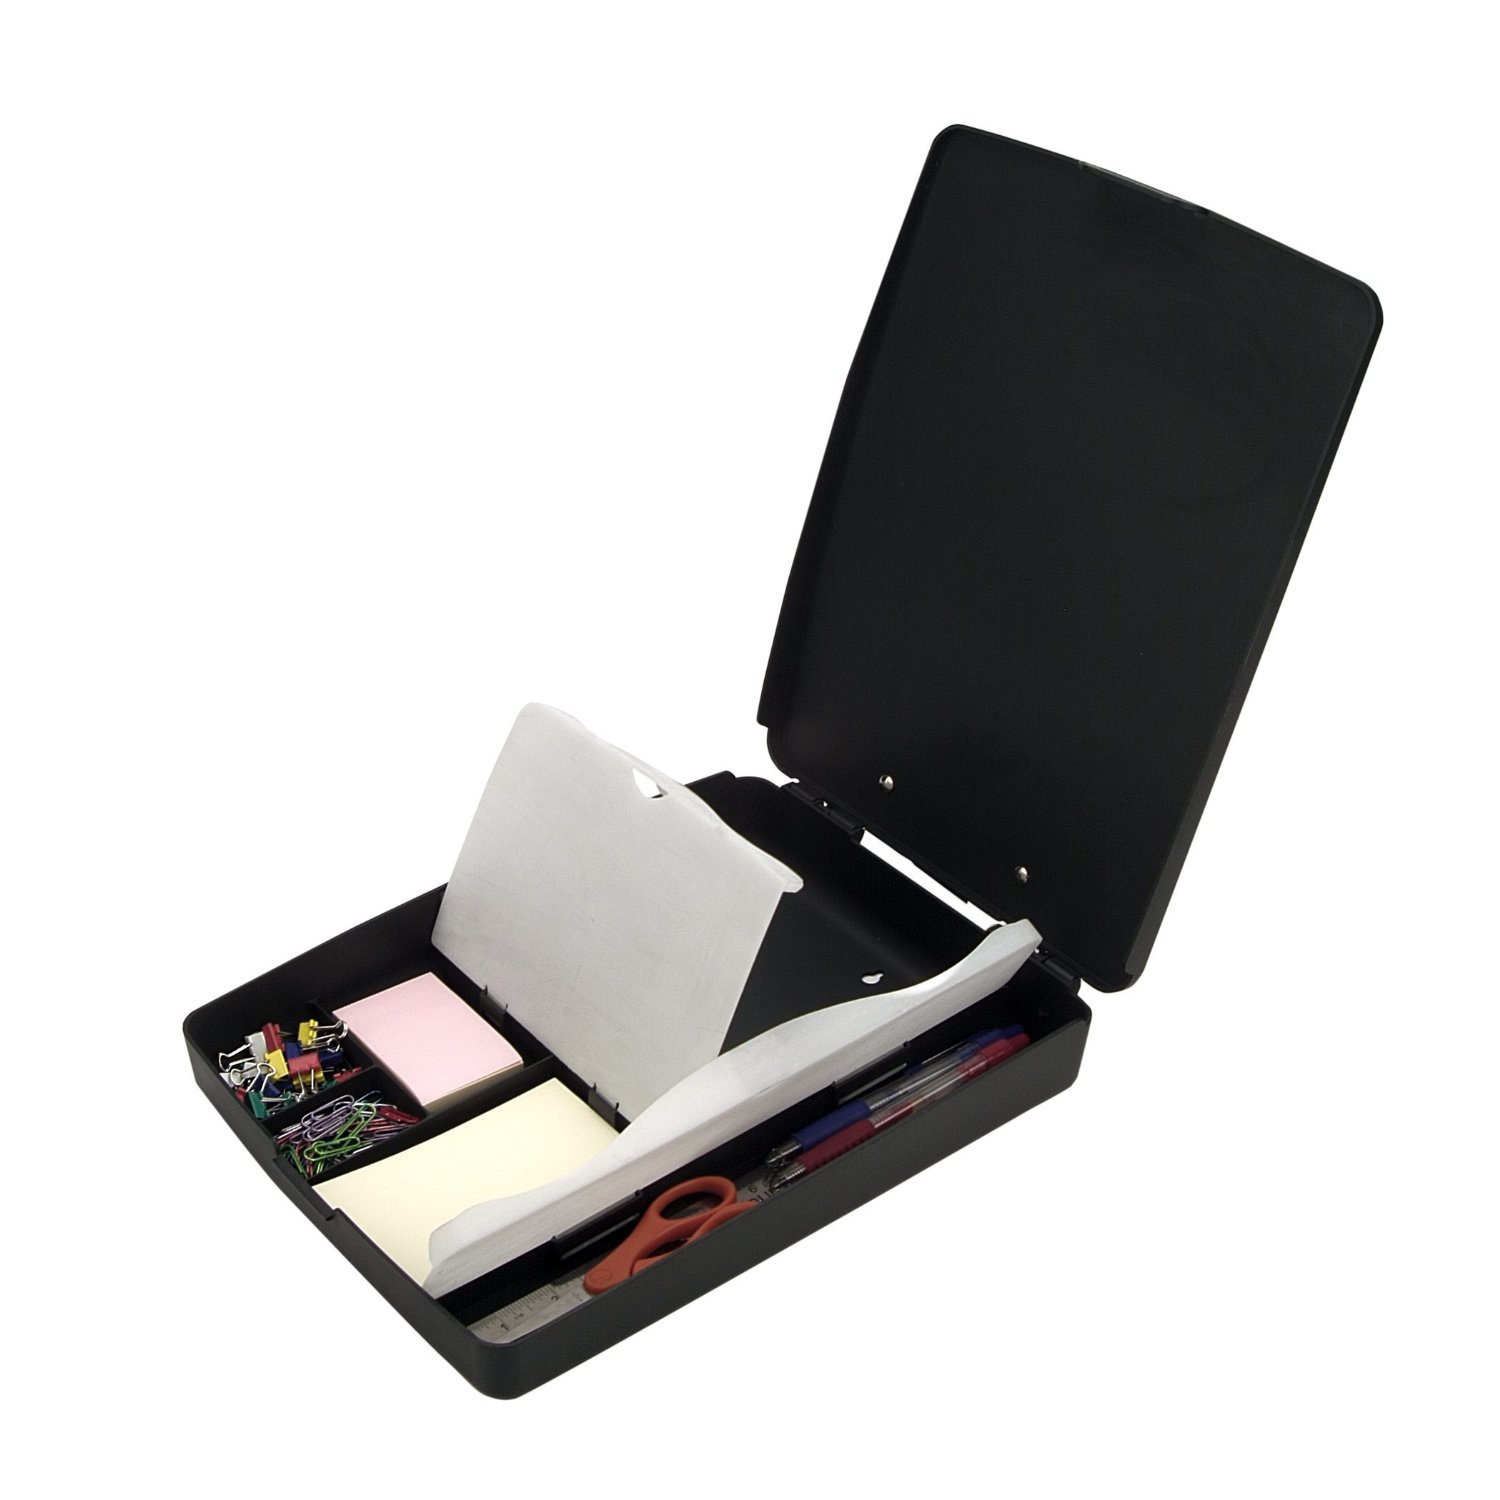 Combination clipboard plus storage for papers and office essentials